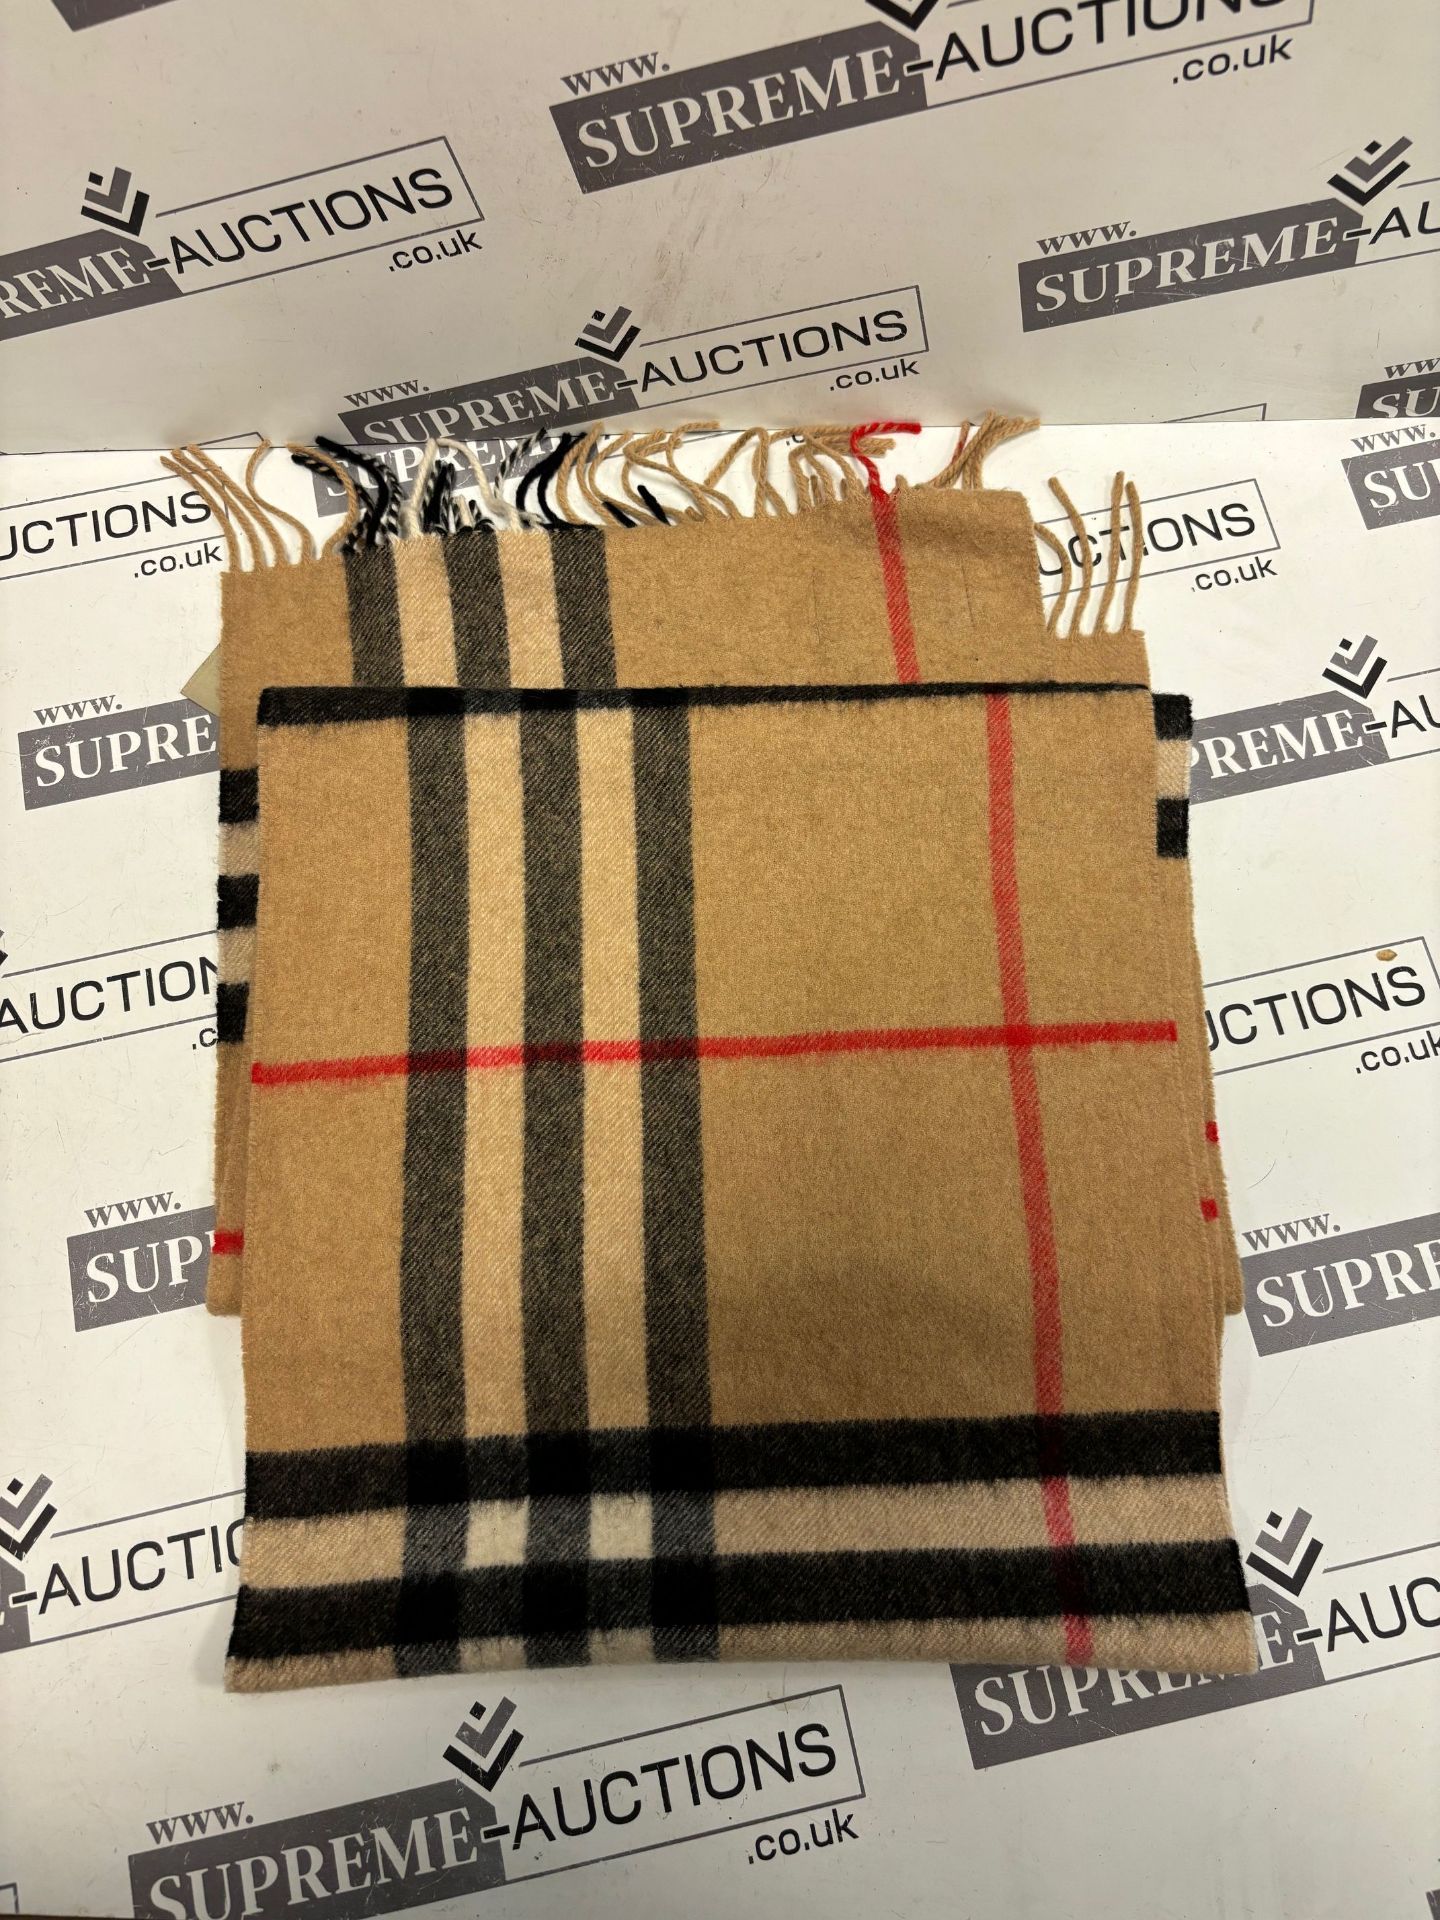 (No Vat)  Burberry brown Classic 100% Cashmere Scarf - Personalised PP. 168x30cm - Image 2 of 3